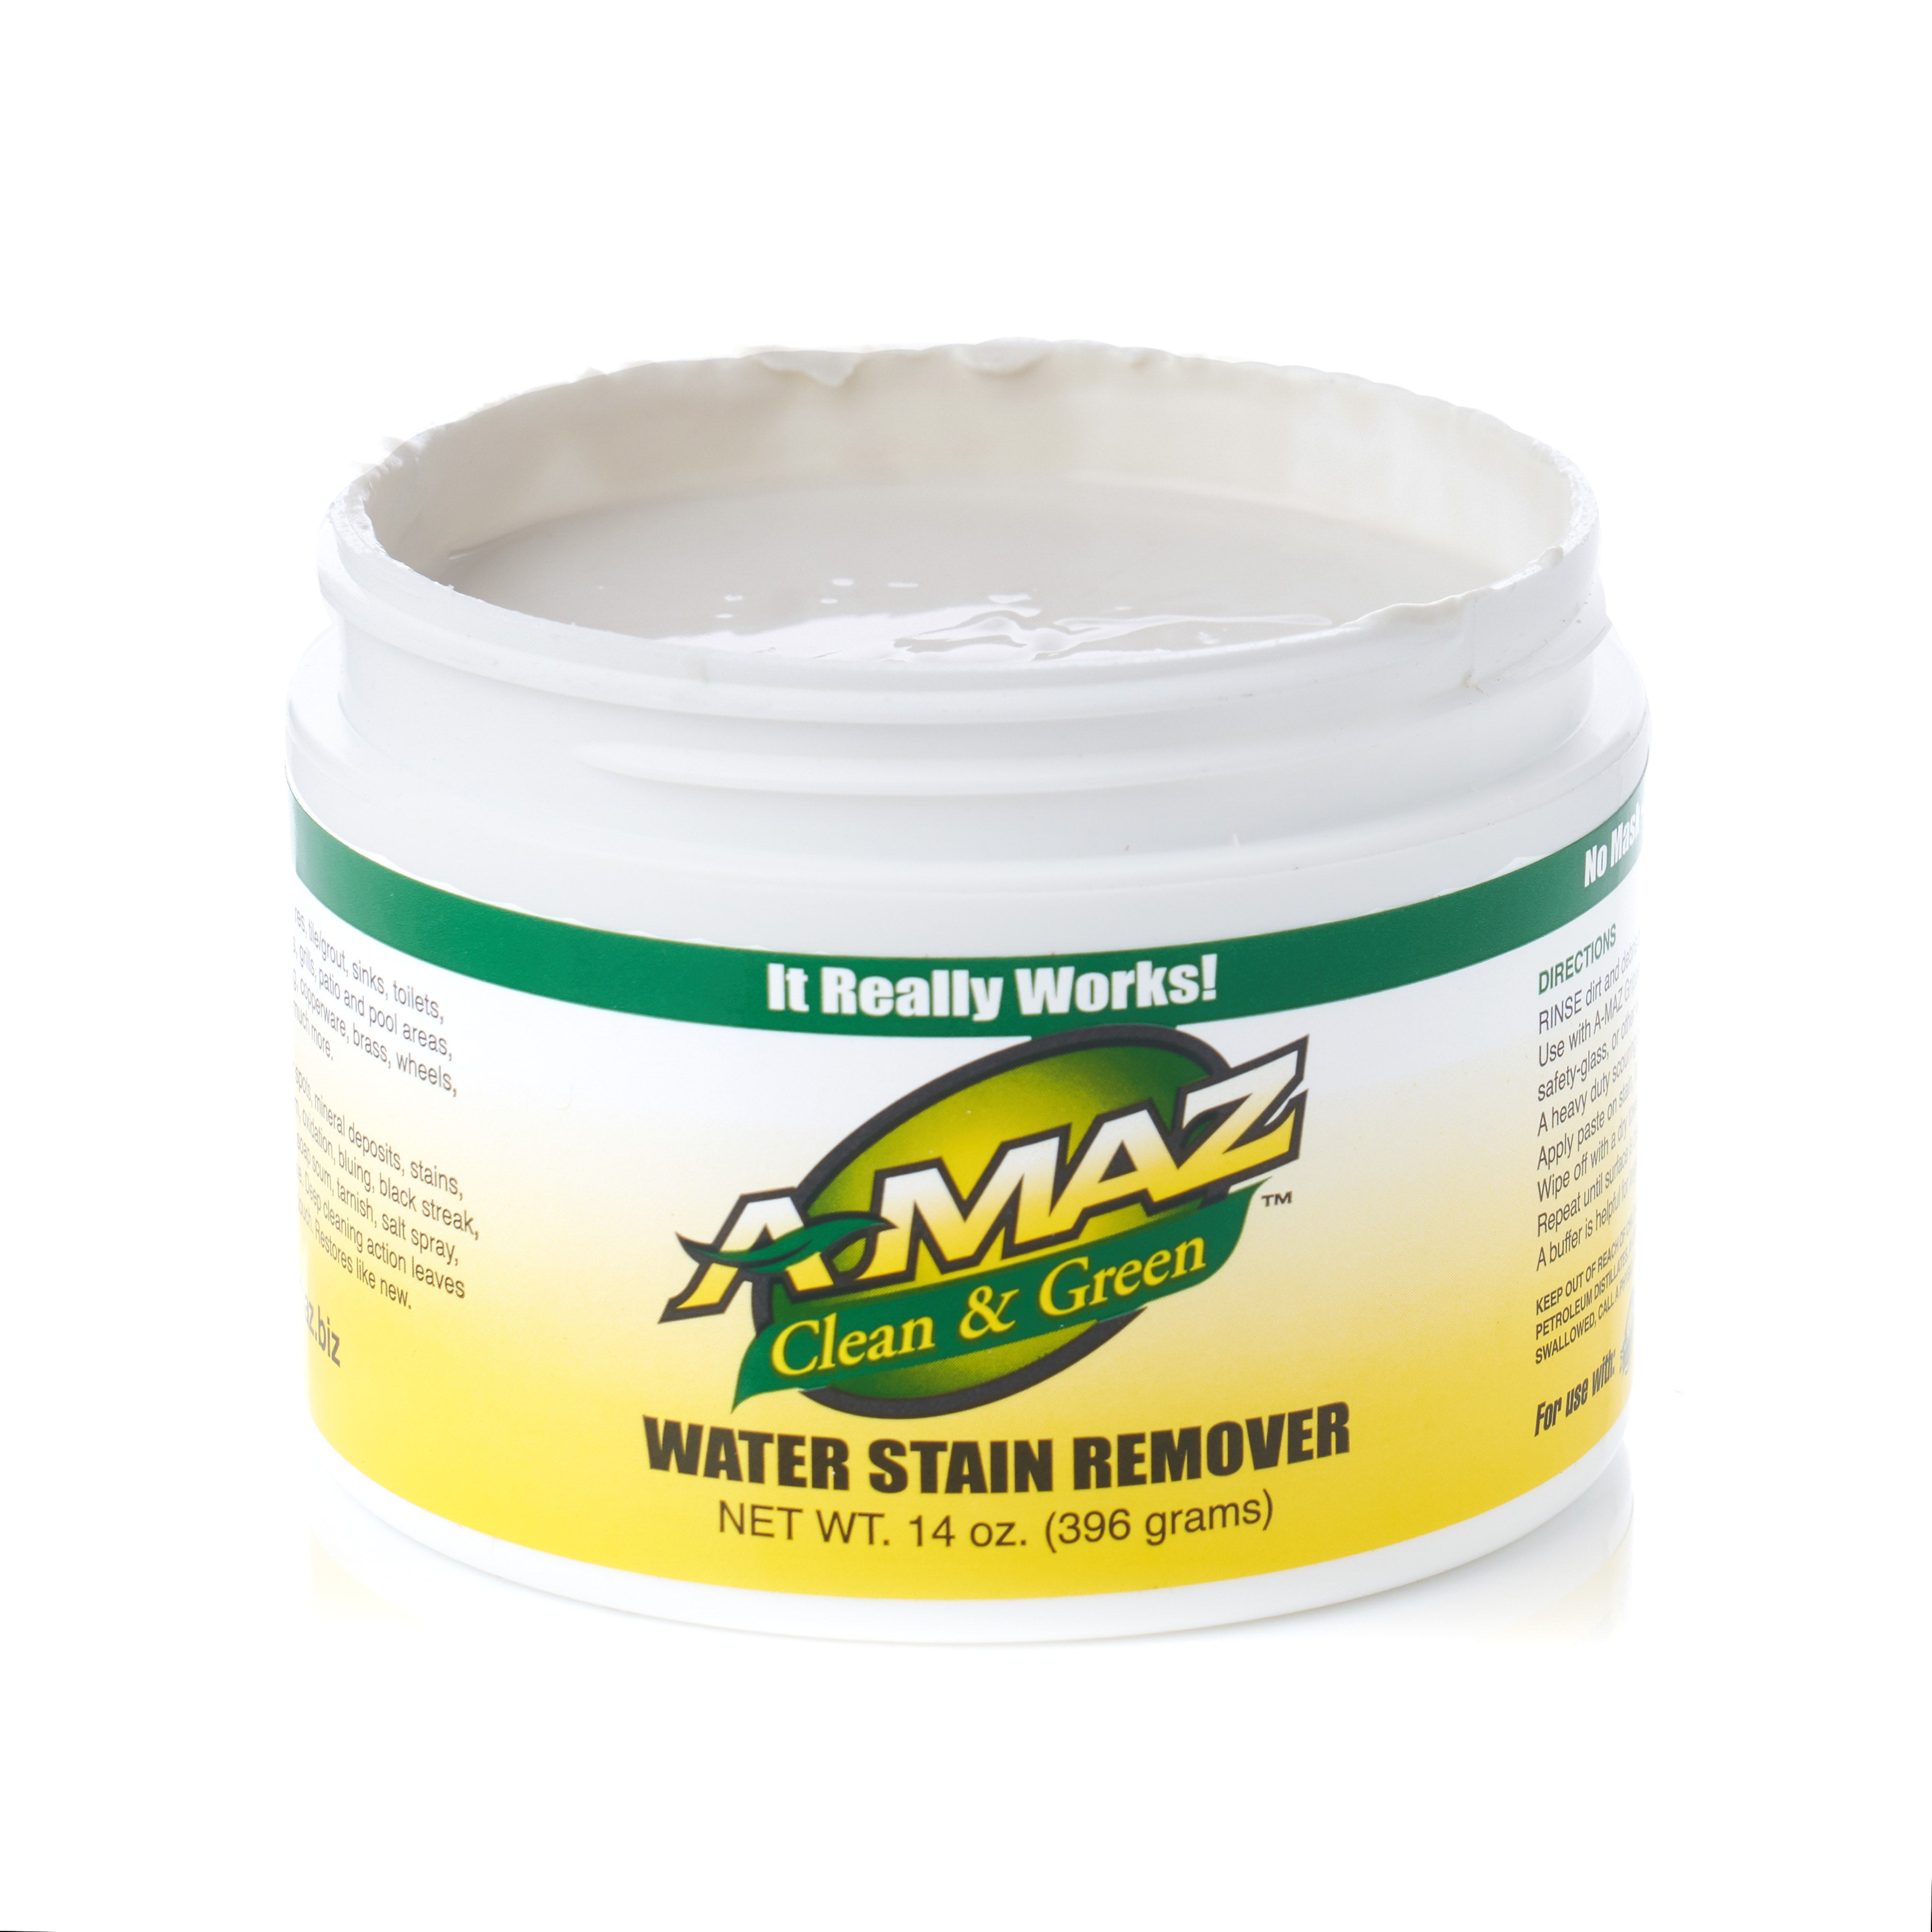 A-MAZ Water Stain Remover - 14 oz jar